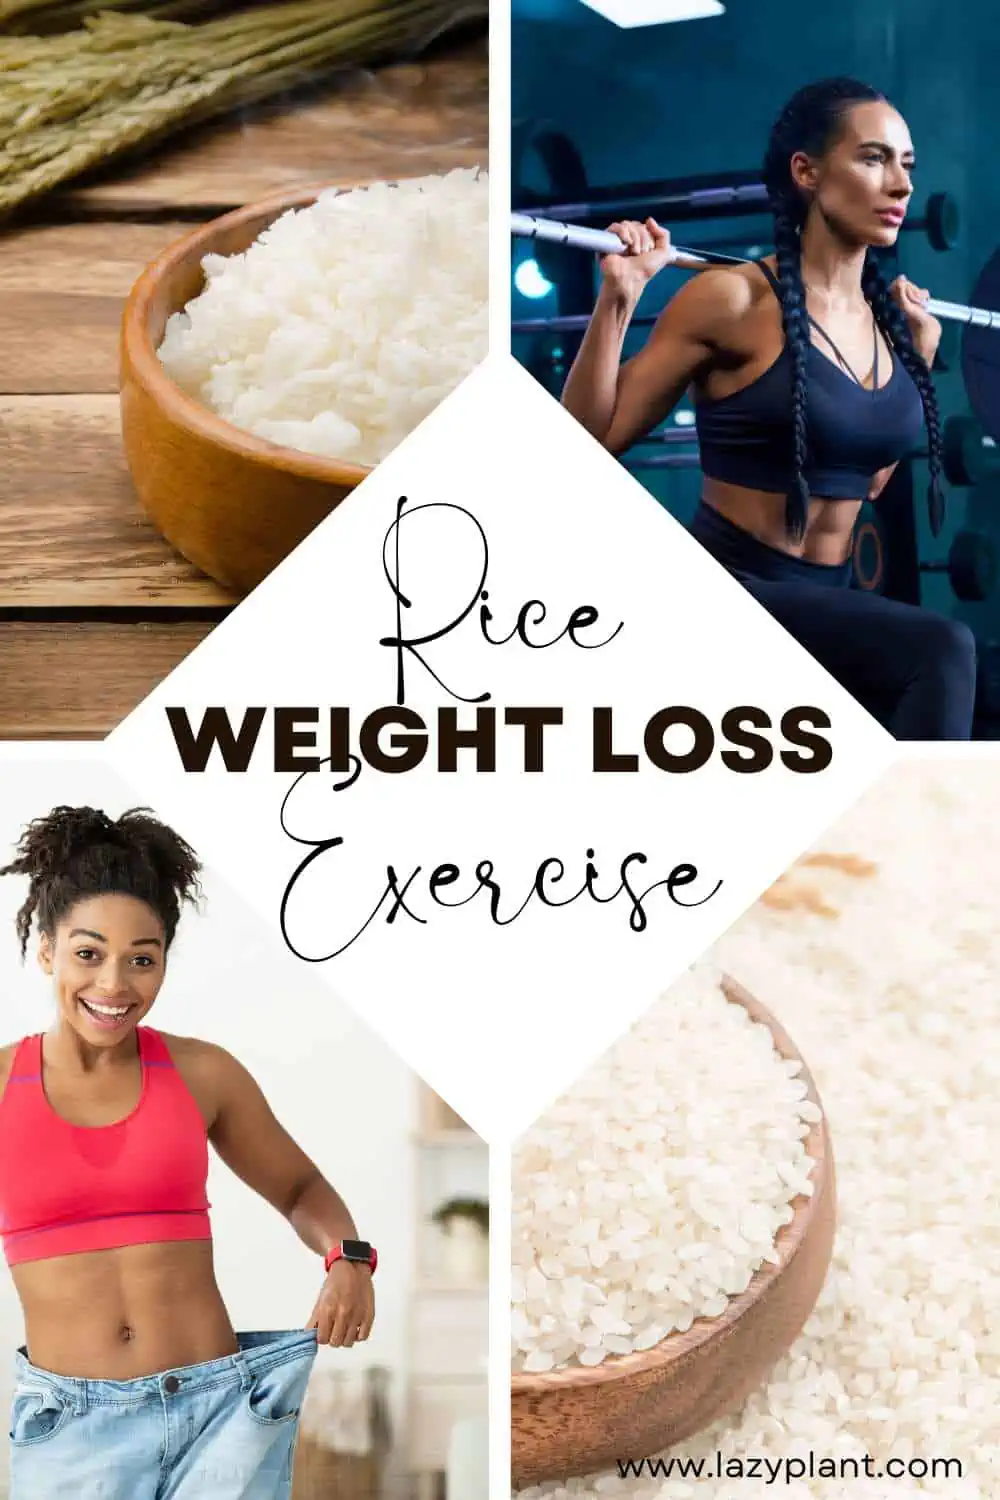 White rice is a great post-workout meal. Only then, even 1–2 cups support weight loss and muscle growth.